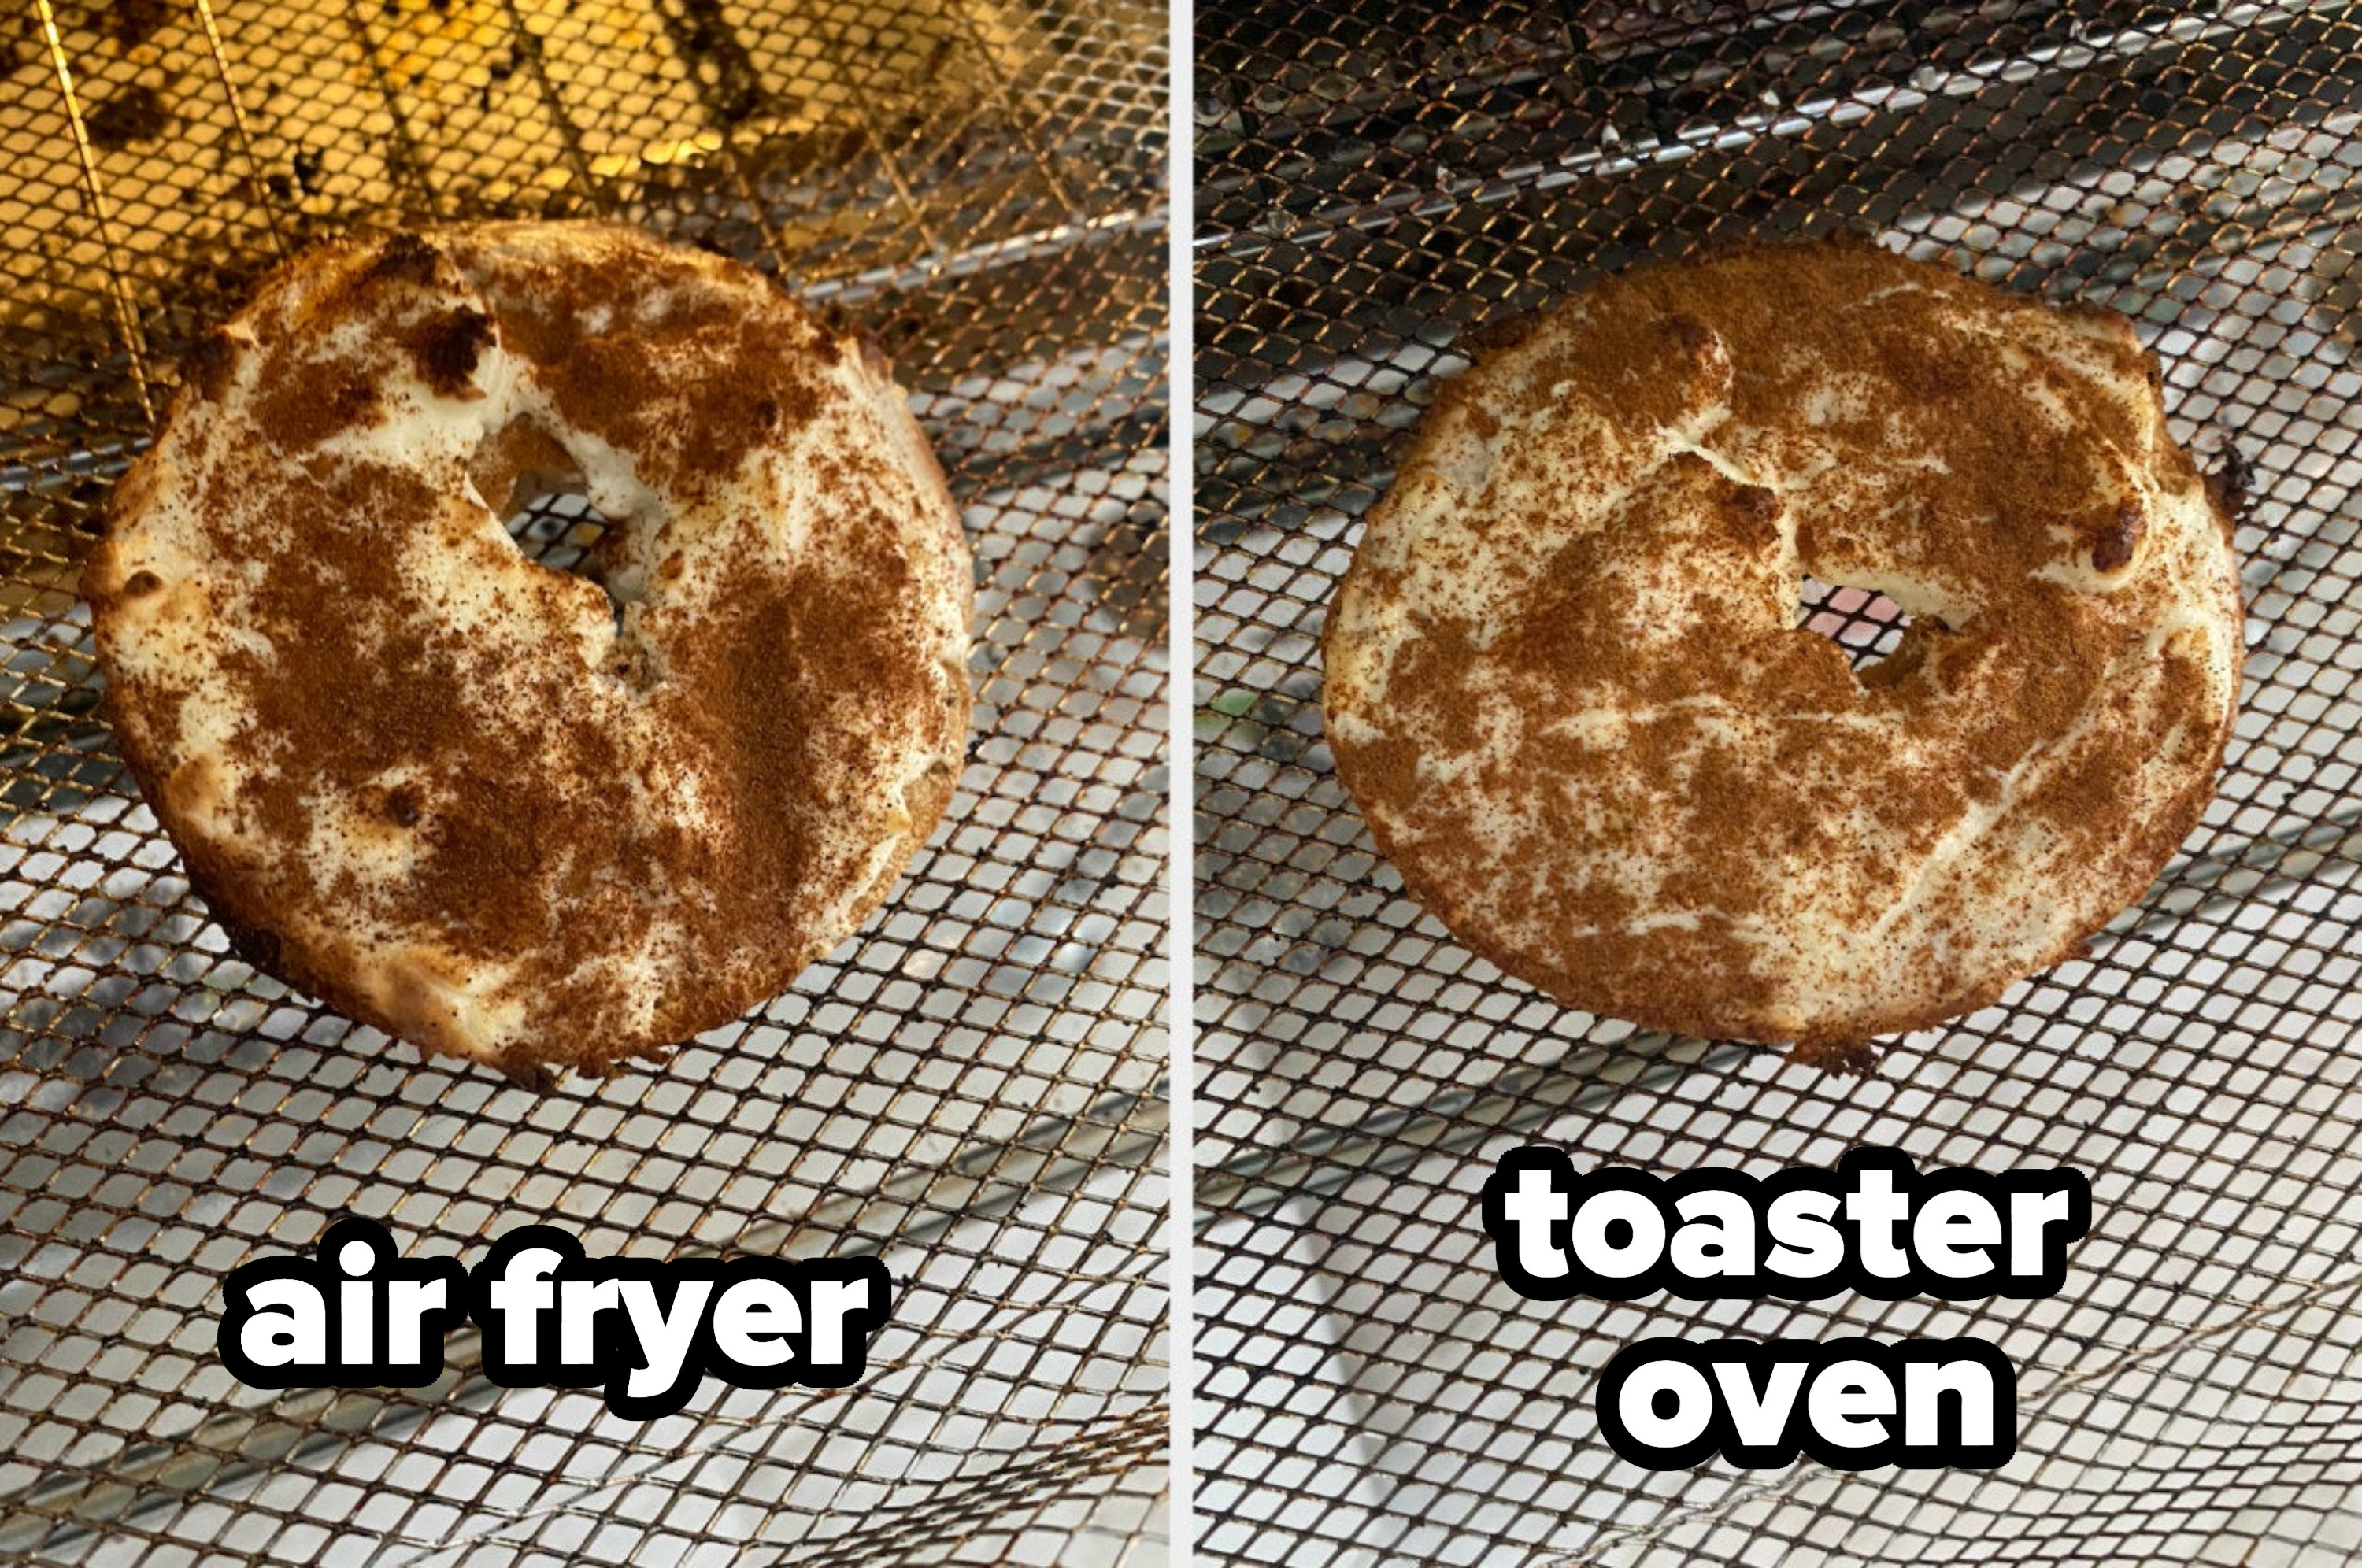 Two very similar-looking bagel slices, one from an air fryer, one from a toaster oven, on wire racks